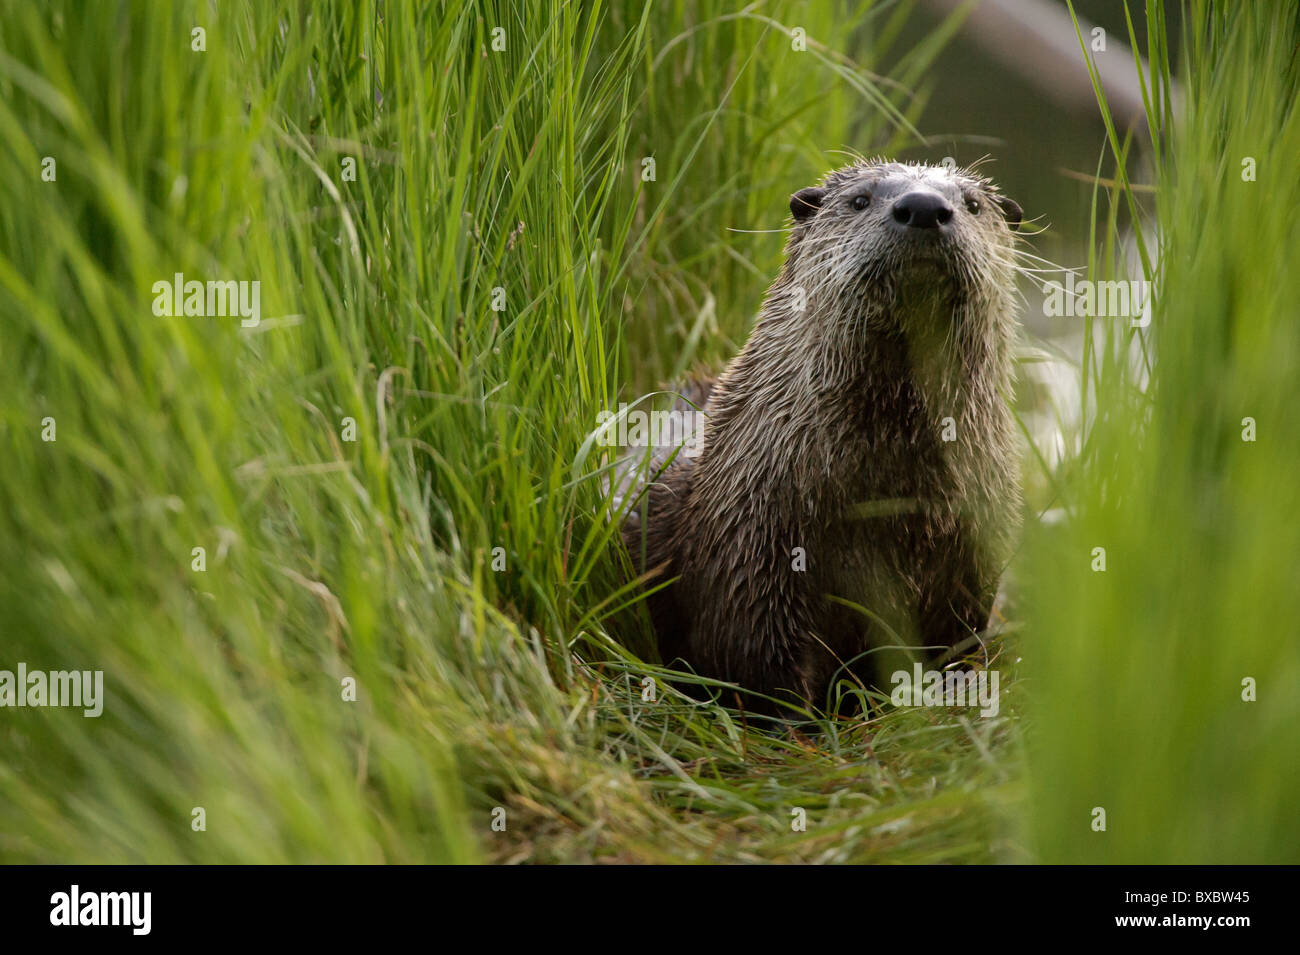 A female adult Northern River Otter (Lontra canadensis) stares through a tunnel of tall grass. Stock Photo